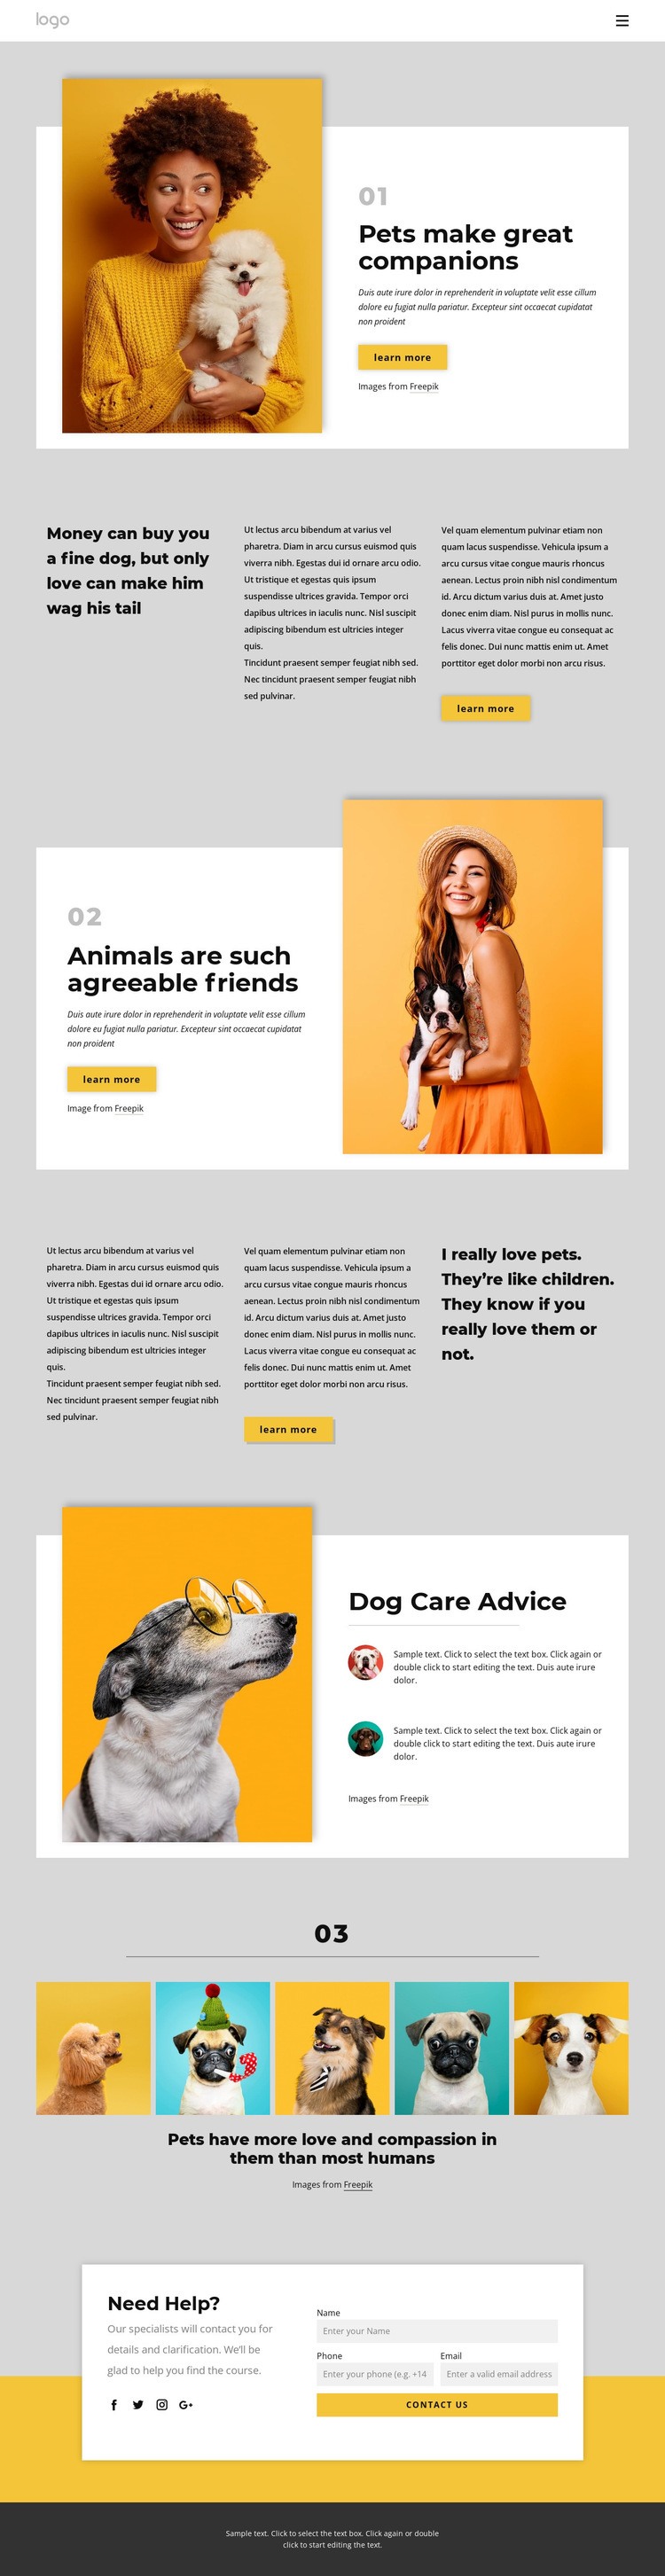 Why pets make us happier Homepage Design